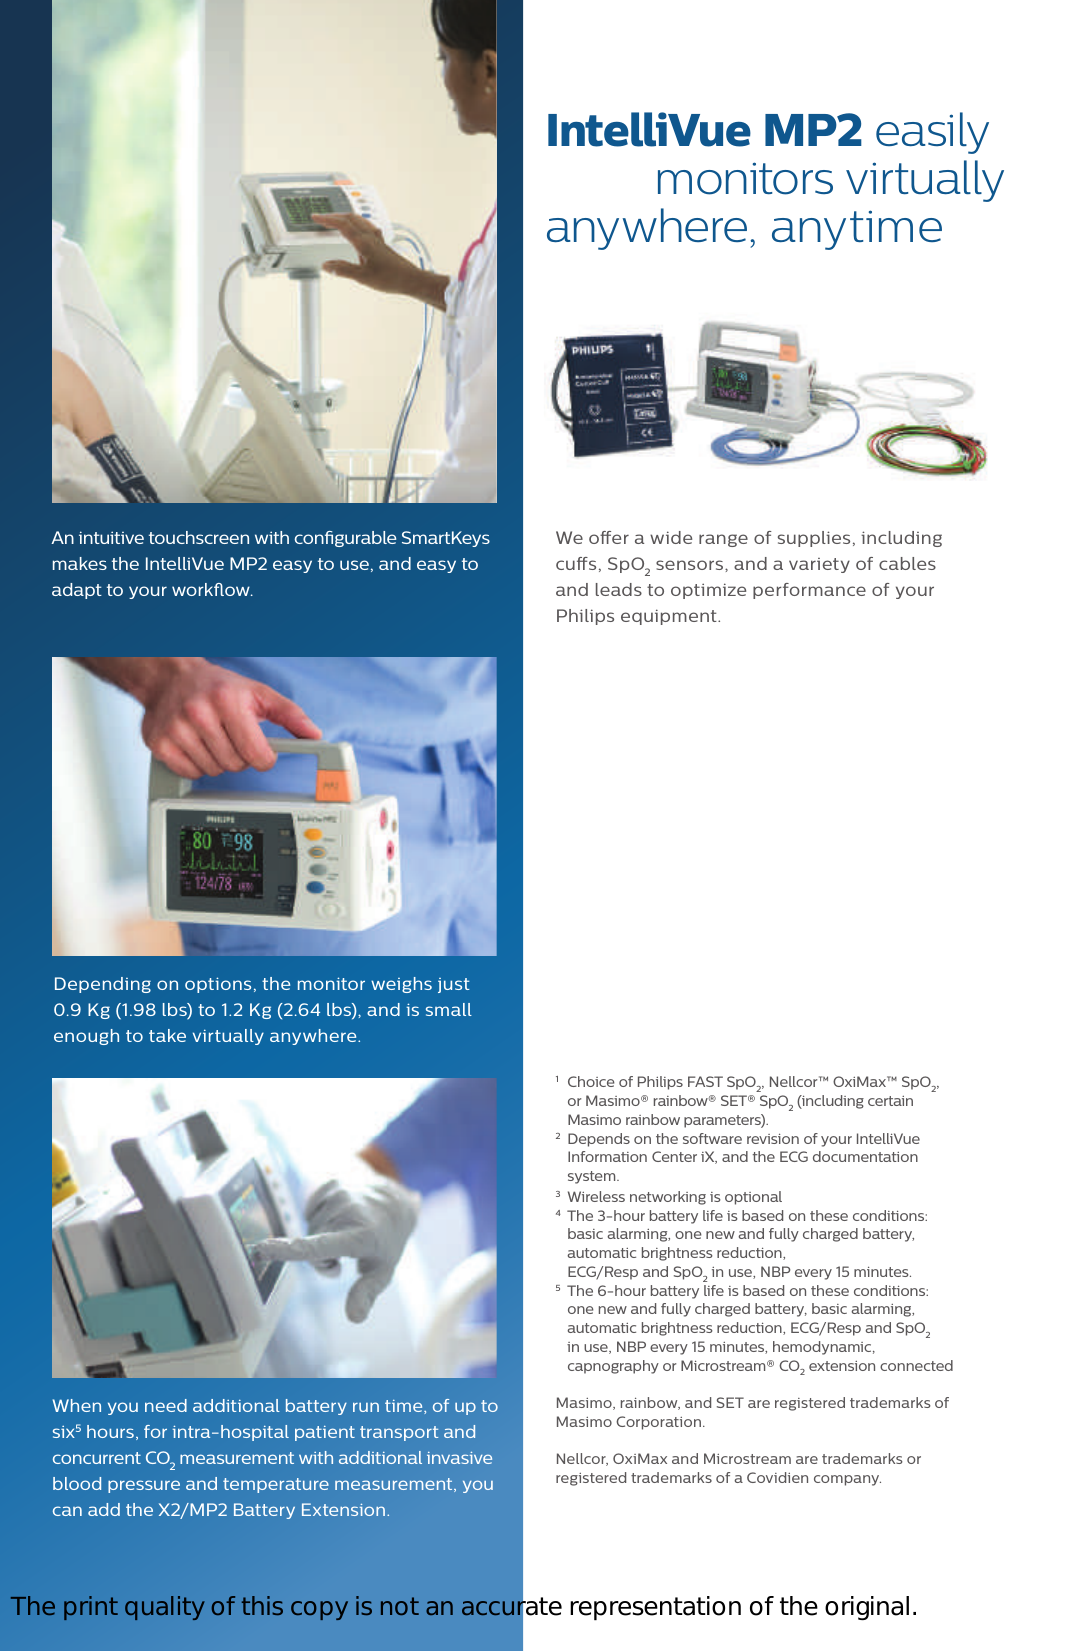 Page 4 of 6 - Philips 865040 452299109441 User Manual Product Brochure Intelli Vue Portable Patient Monitor MP2 Ffd03f79deaf4e43a5d8a77c014f1d93